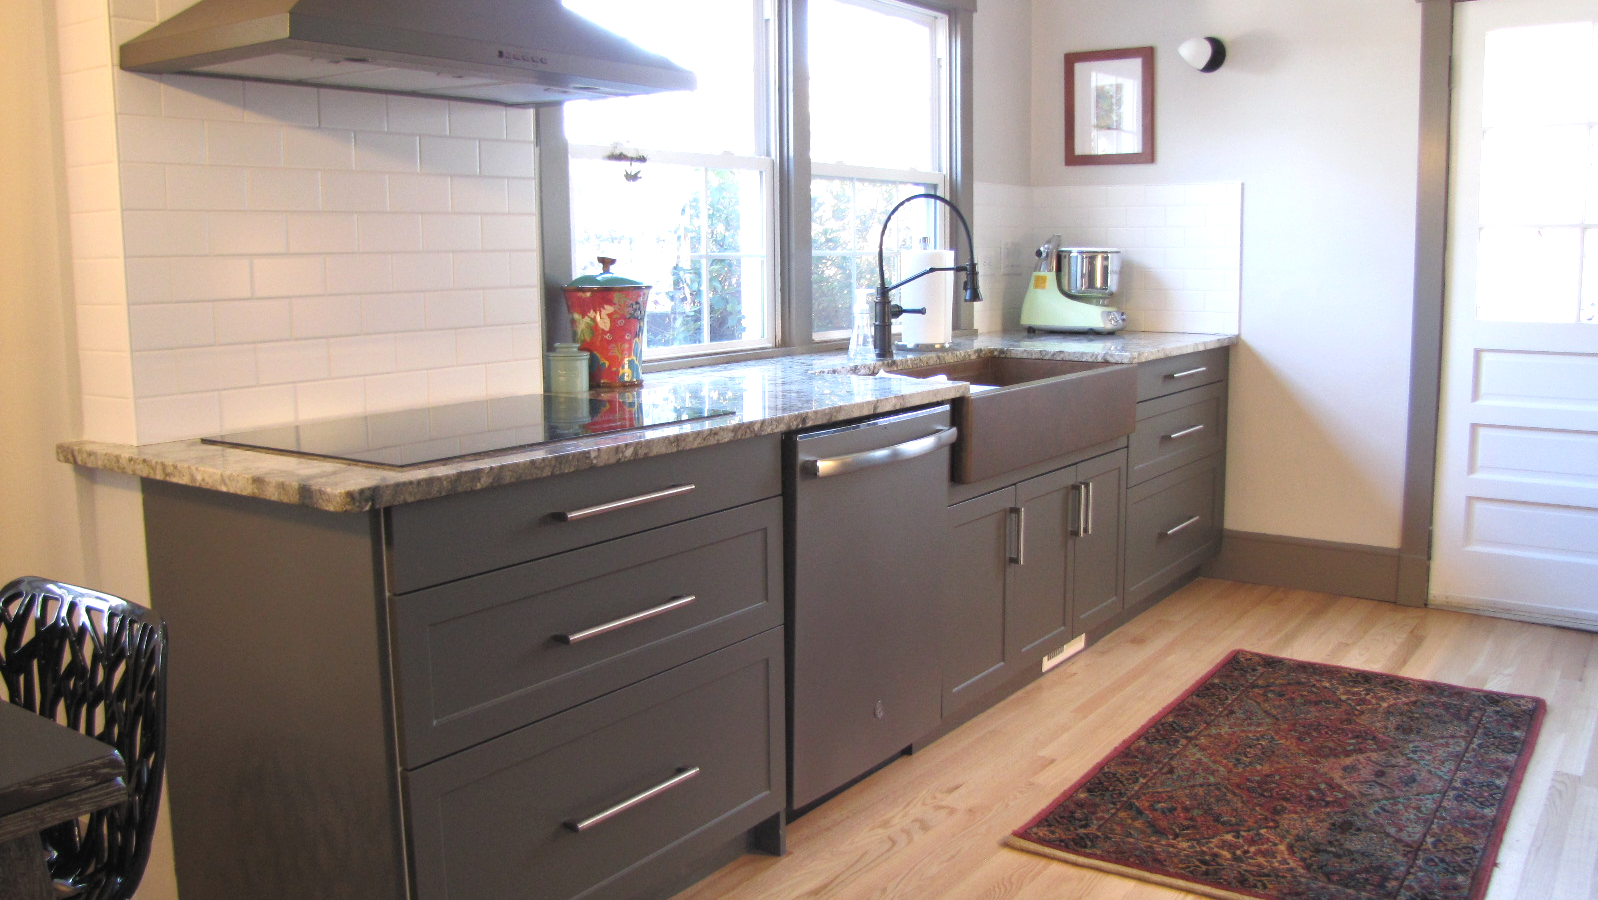 IKEA Kitchen cabinets with hammered copper apron sink